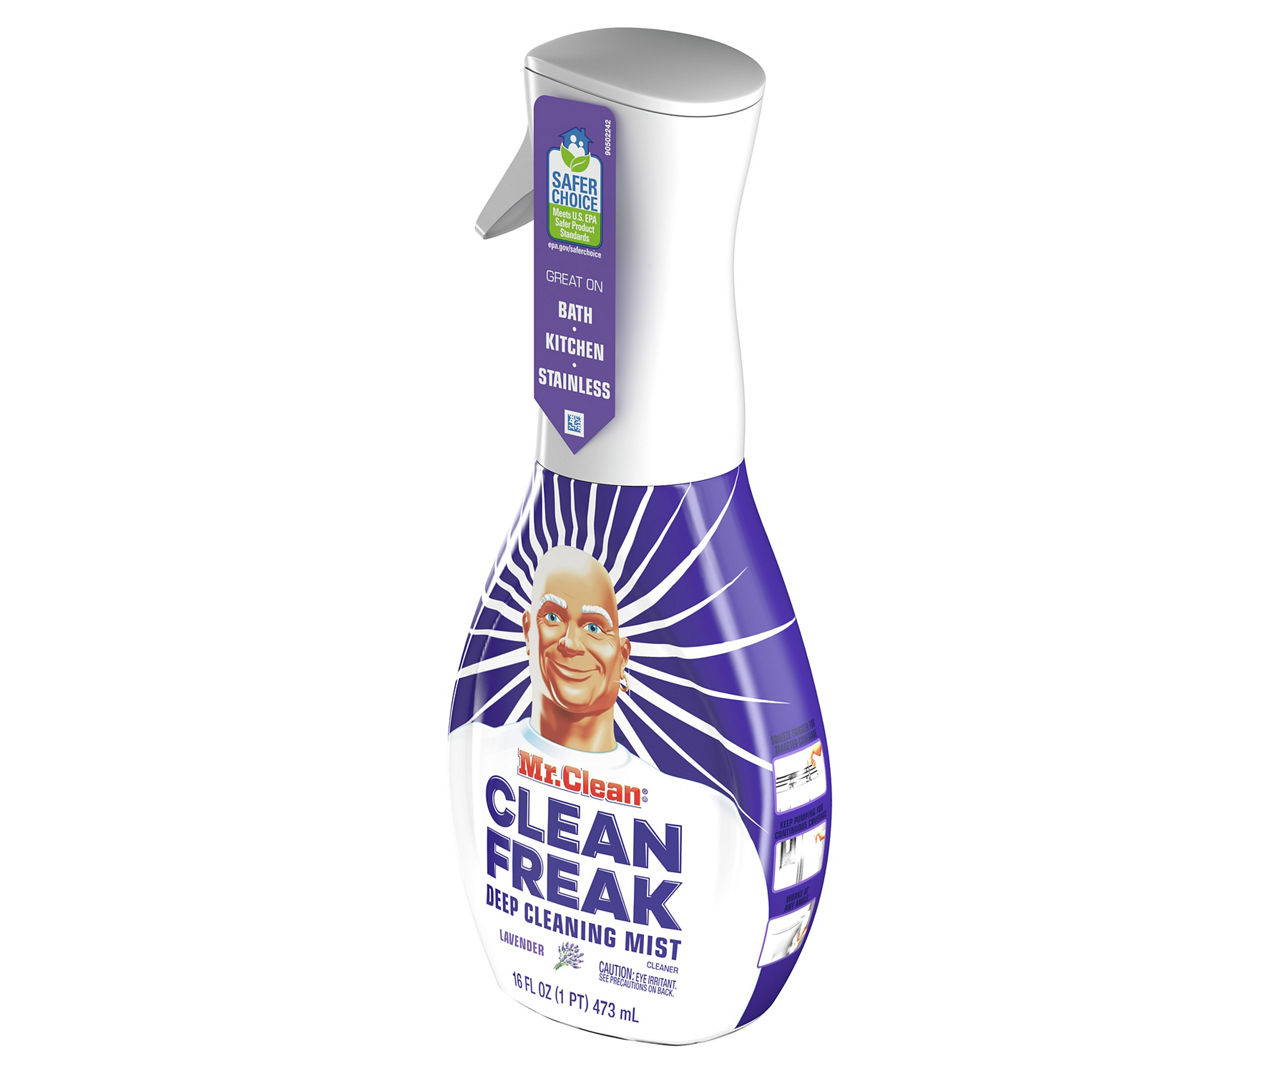 Save on Mr. Clean Clean Freak Deep Cleaning Mist Lavender Refill